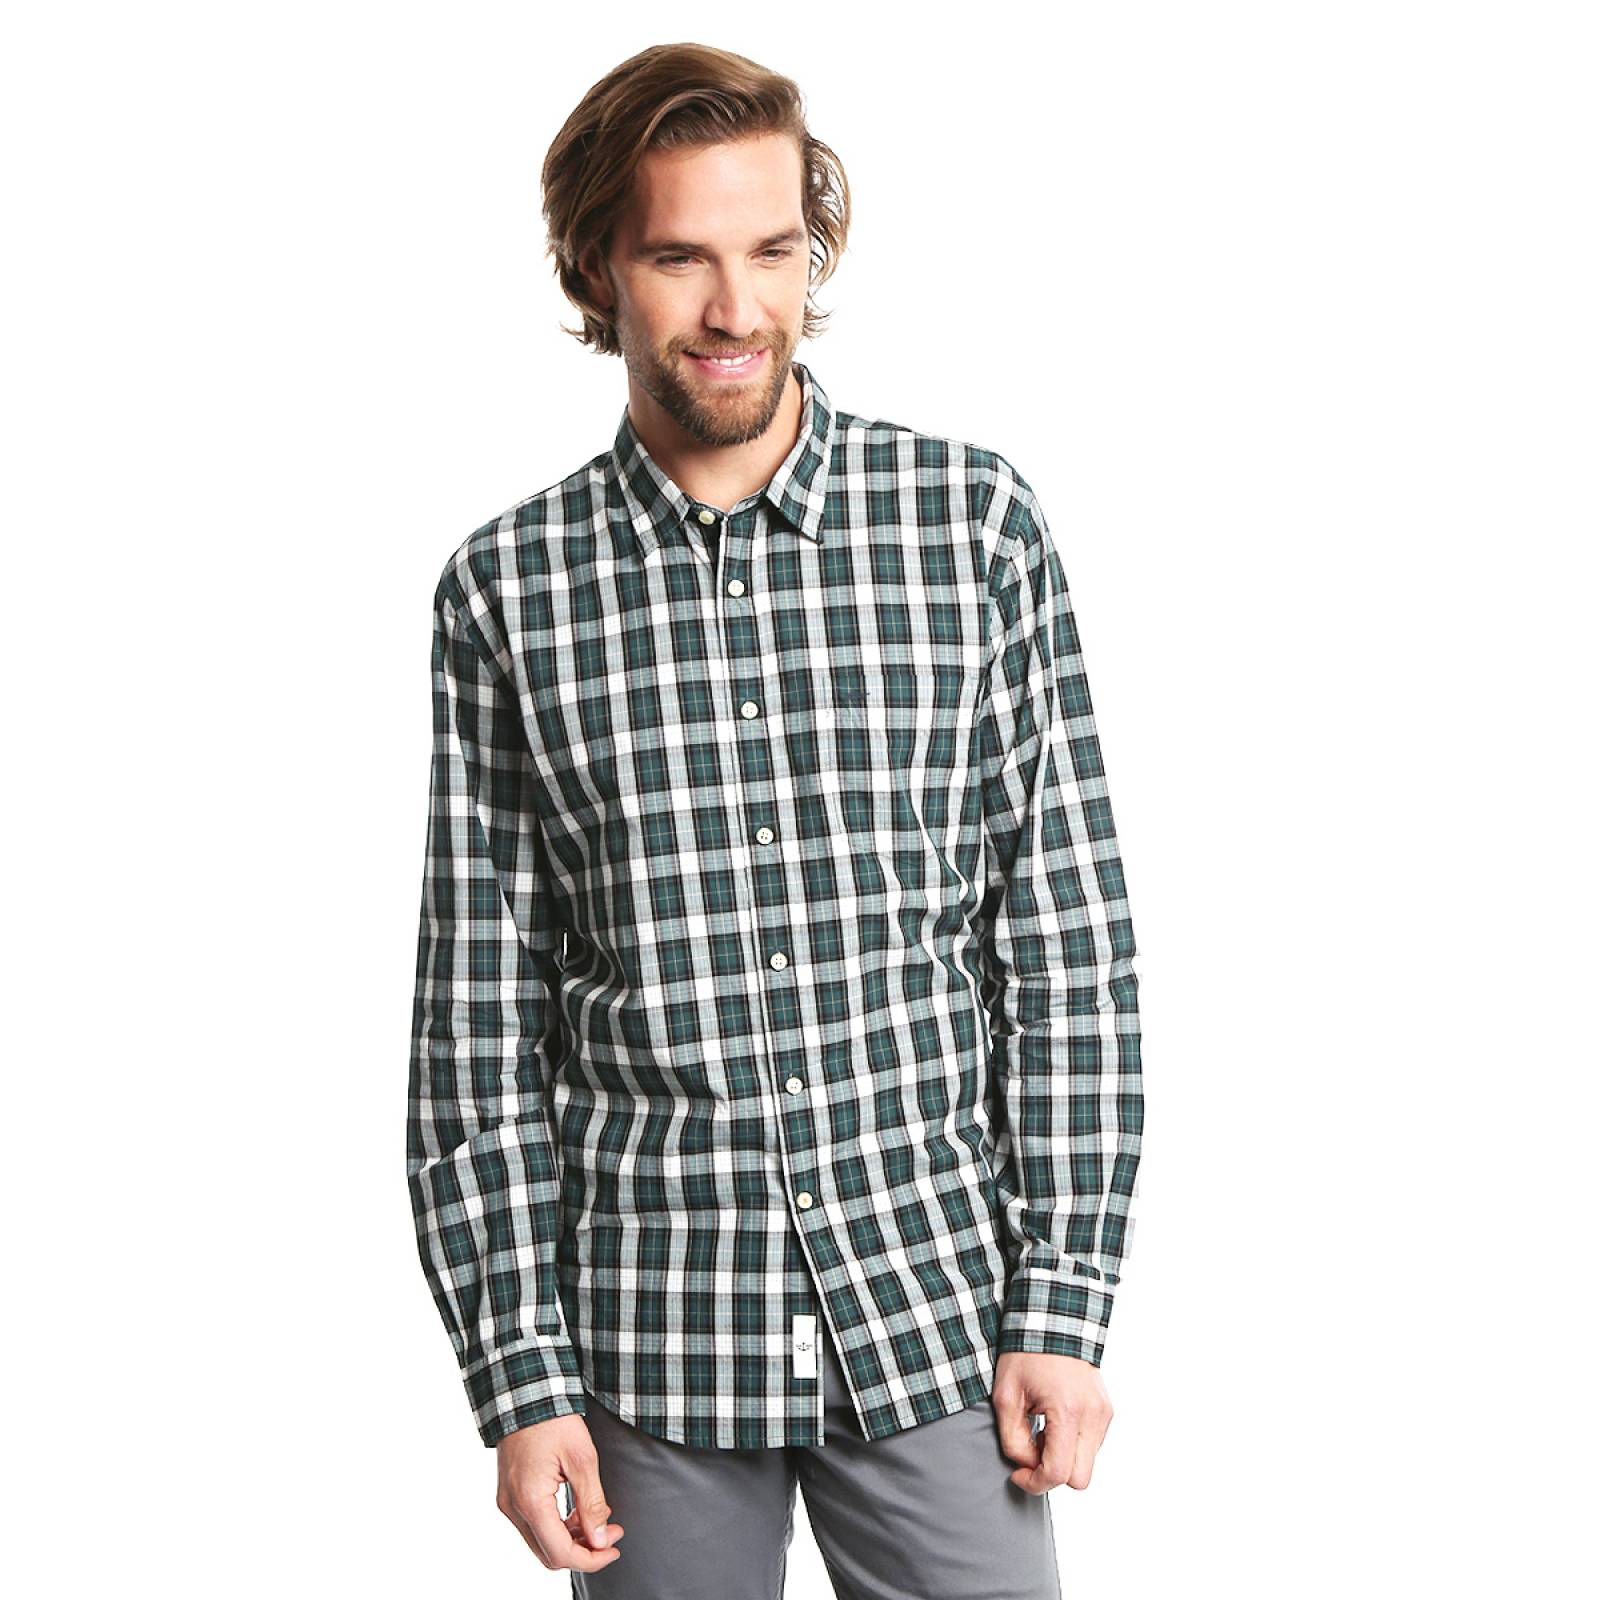 Camisa Laundered Fitted Noel Winter Pine Plaid para Caballero